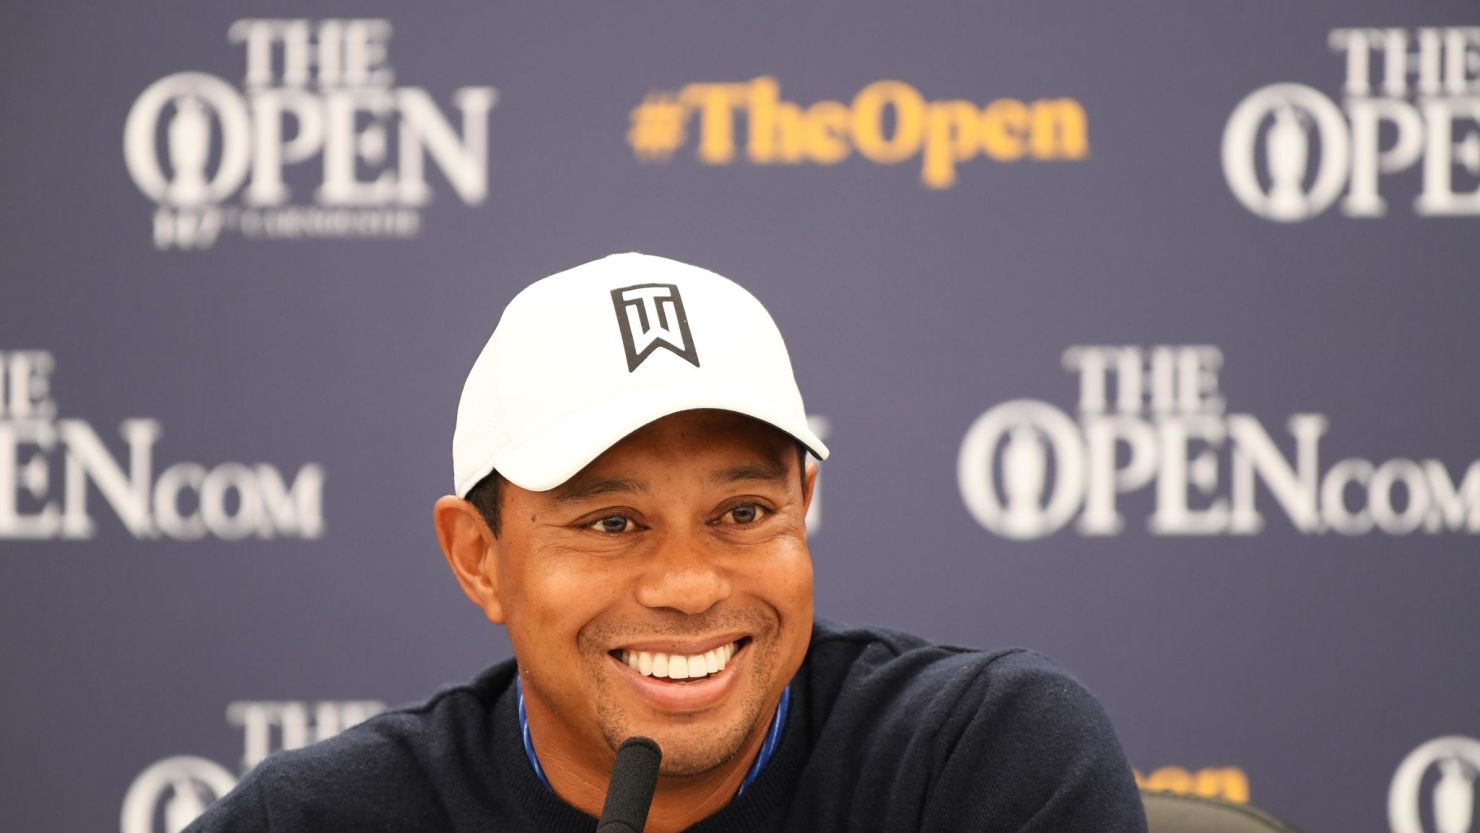 Tiger Woods is feeling confident about his chances in the Open this week.